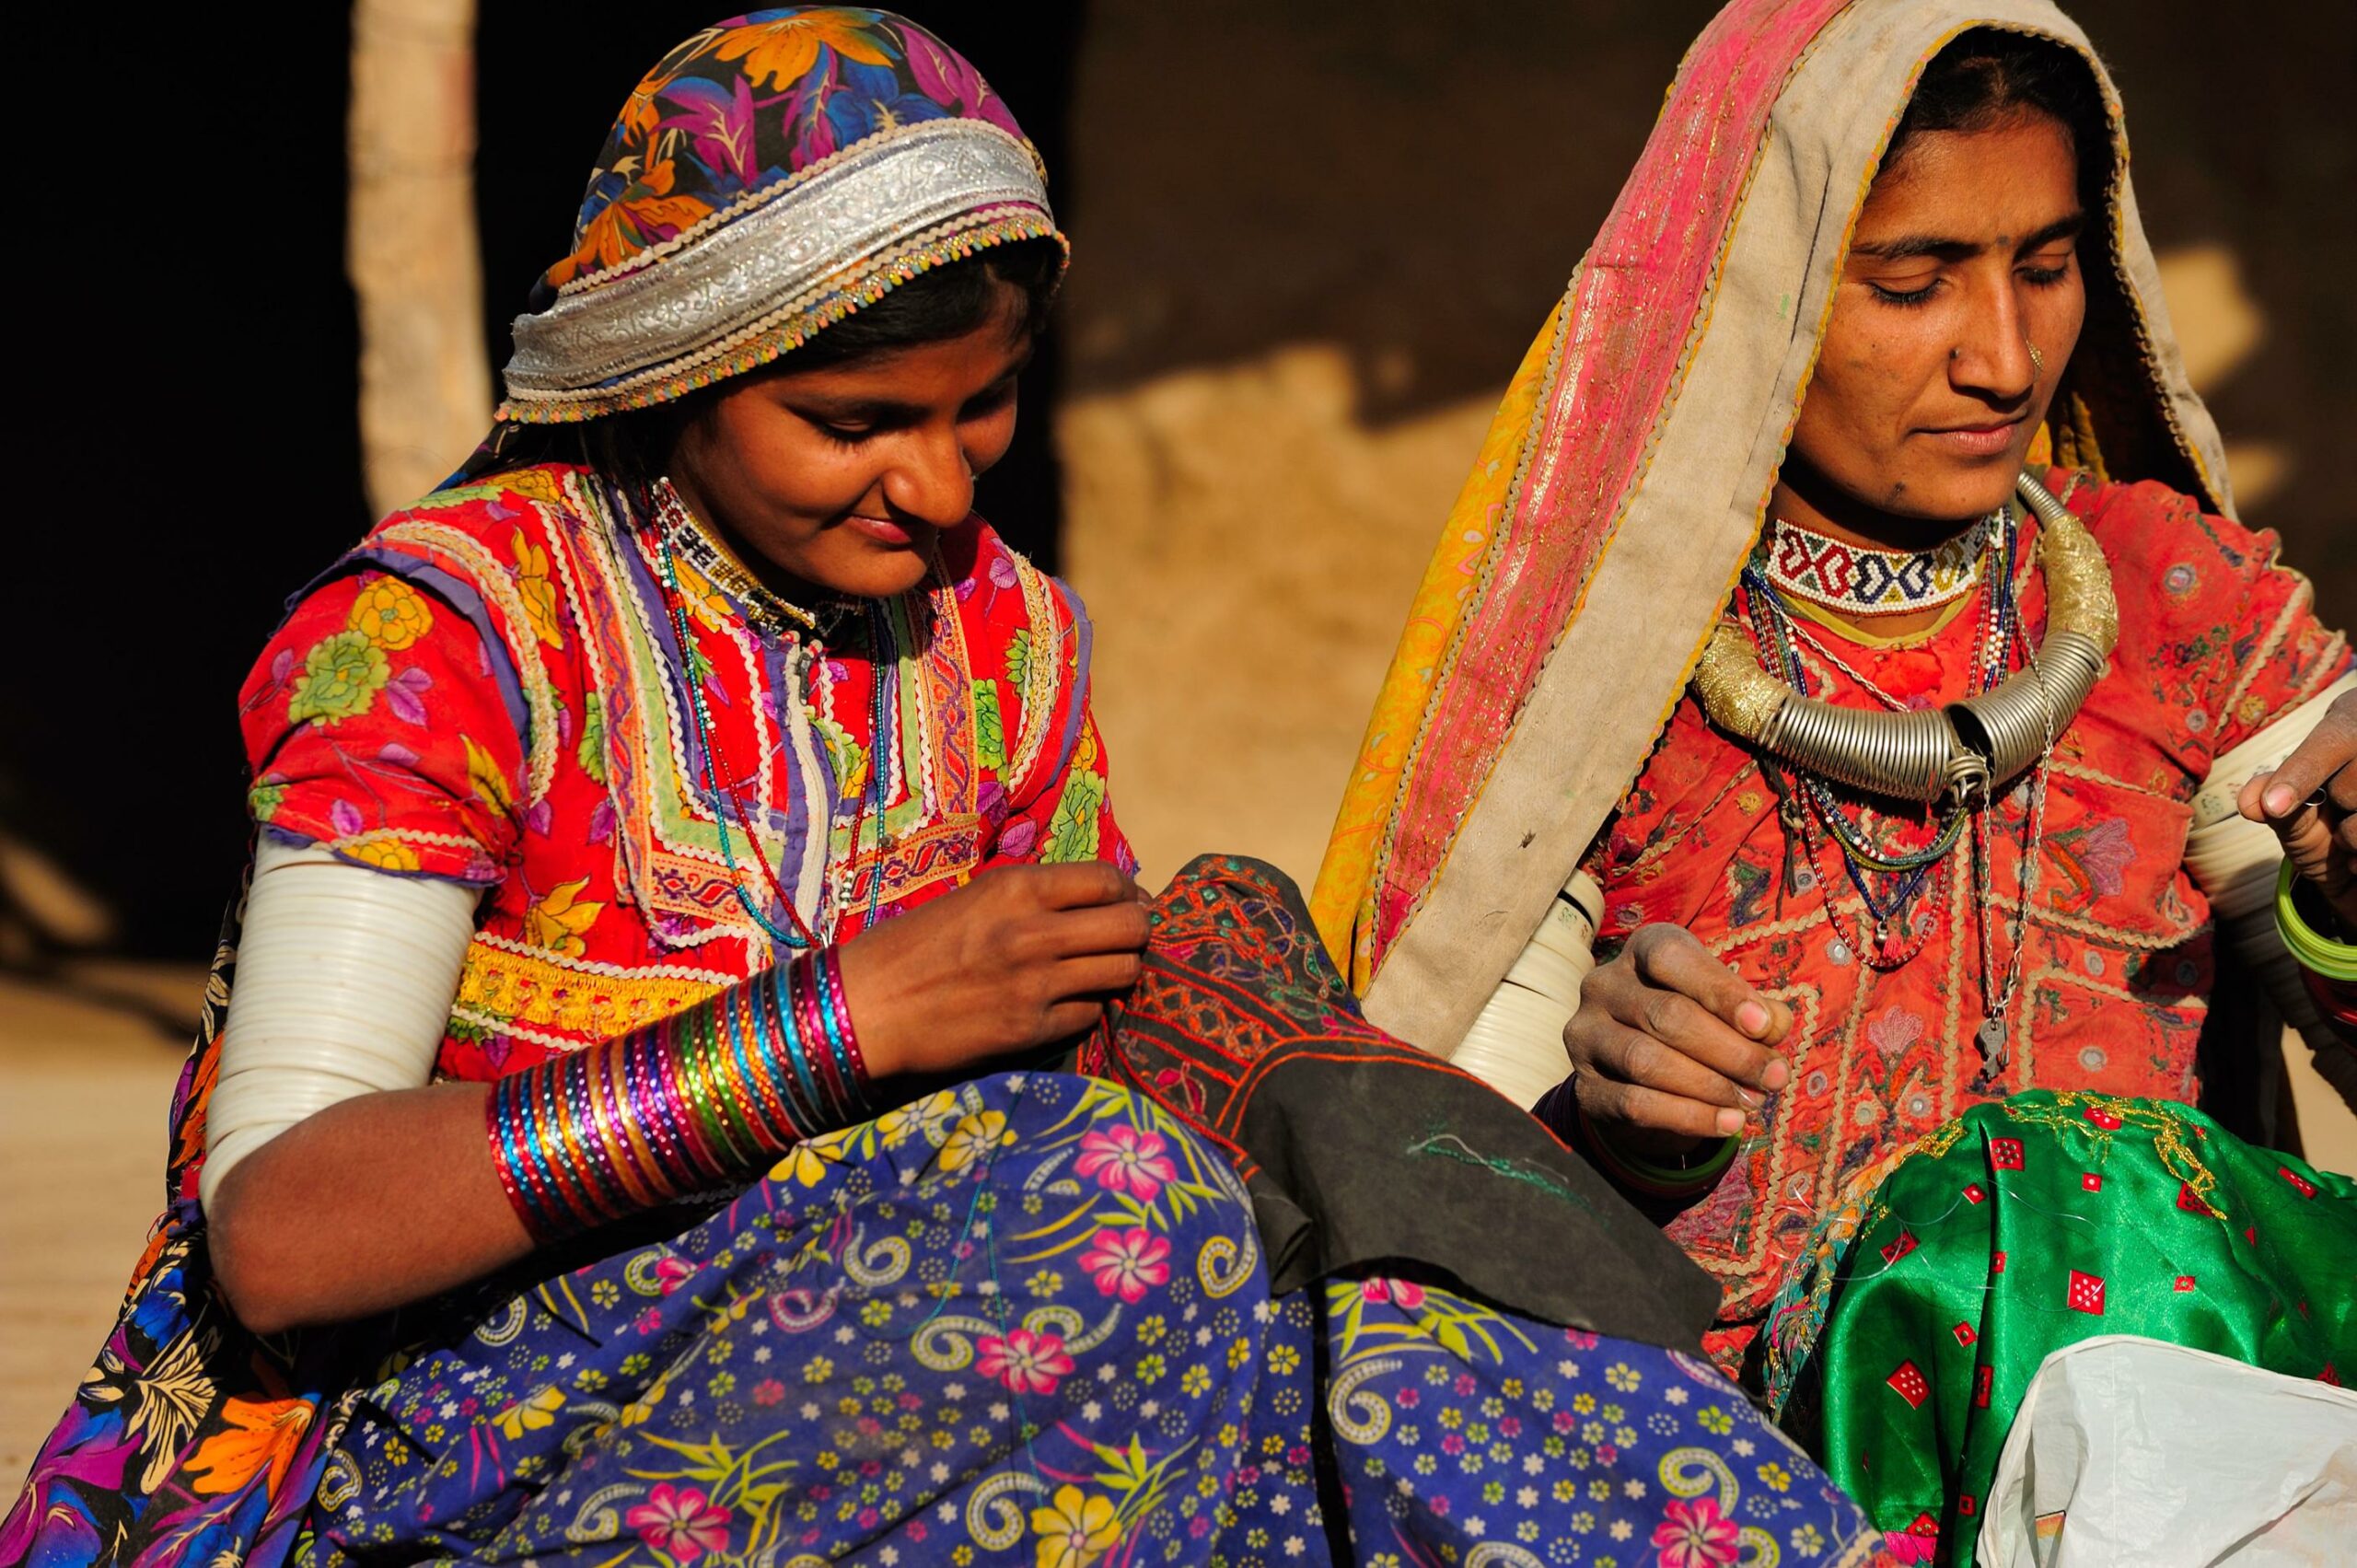 Jobs for women in rural India affected by COVID-19 pandemic